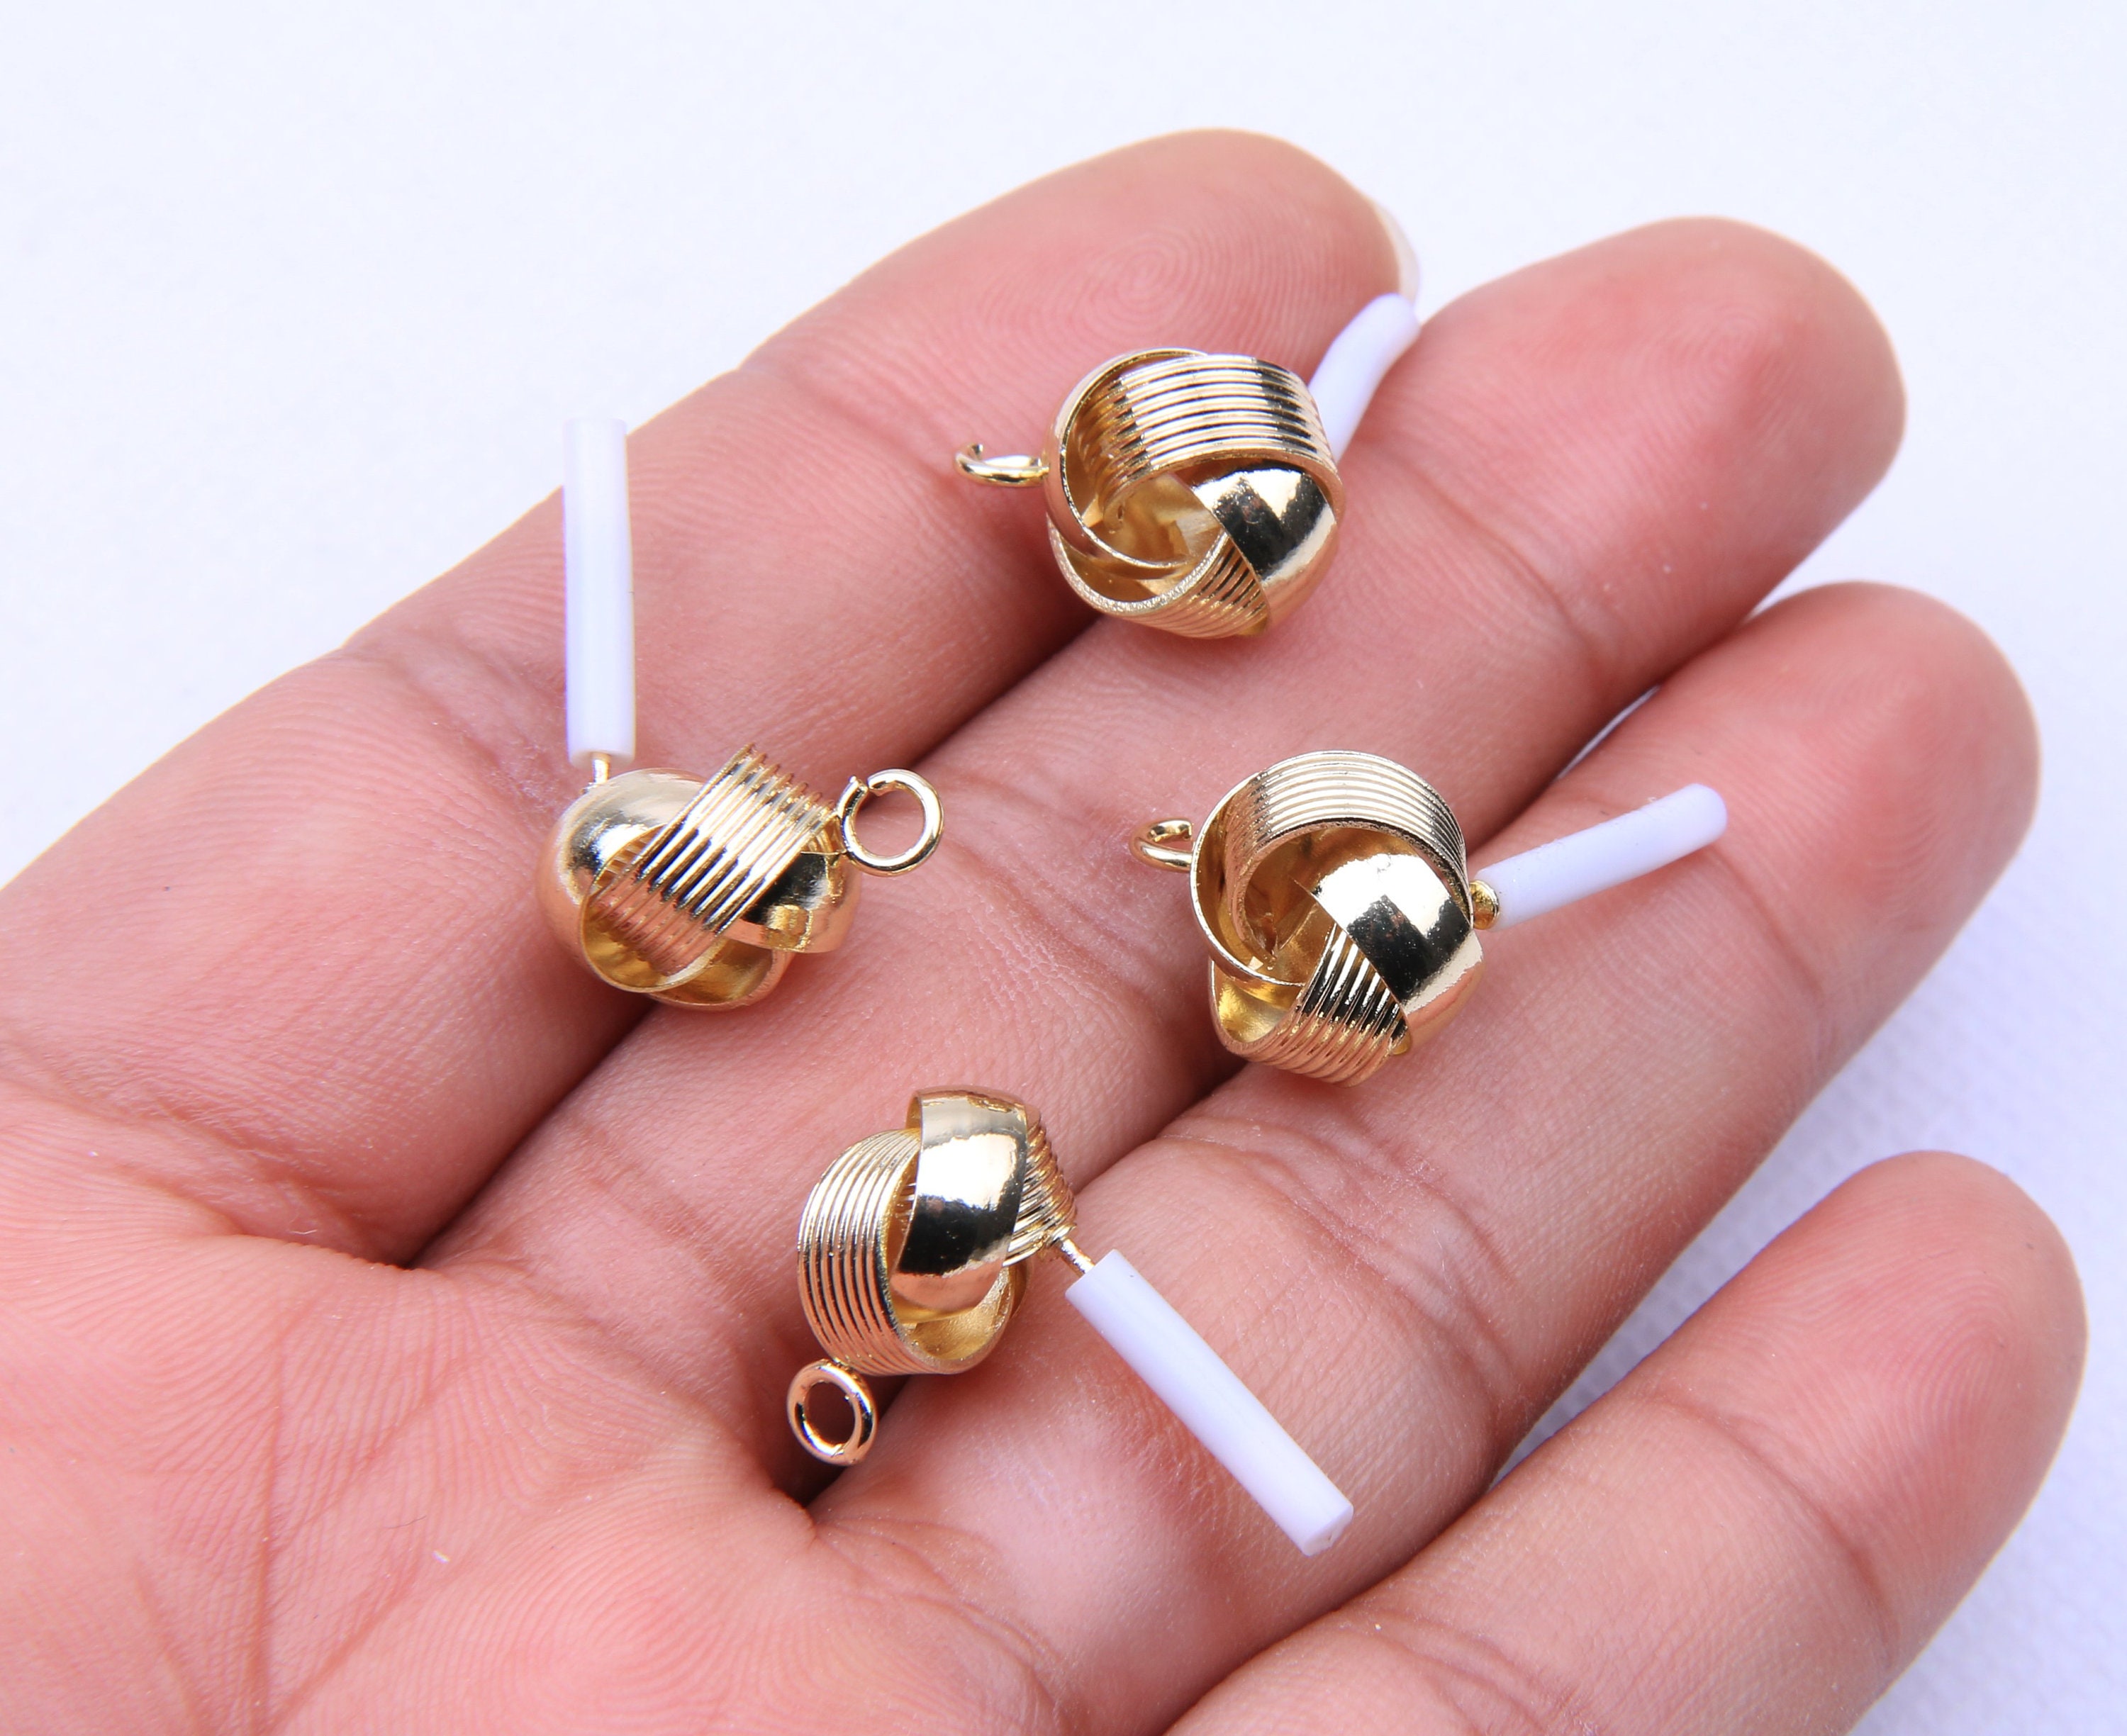 Gold plated alloy earring post-Alloy earring charms-Circle shape earring connector-earring pendant-earring findings jewelry supply BR0958